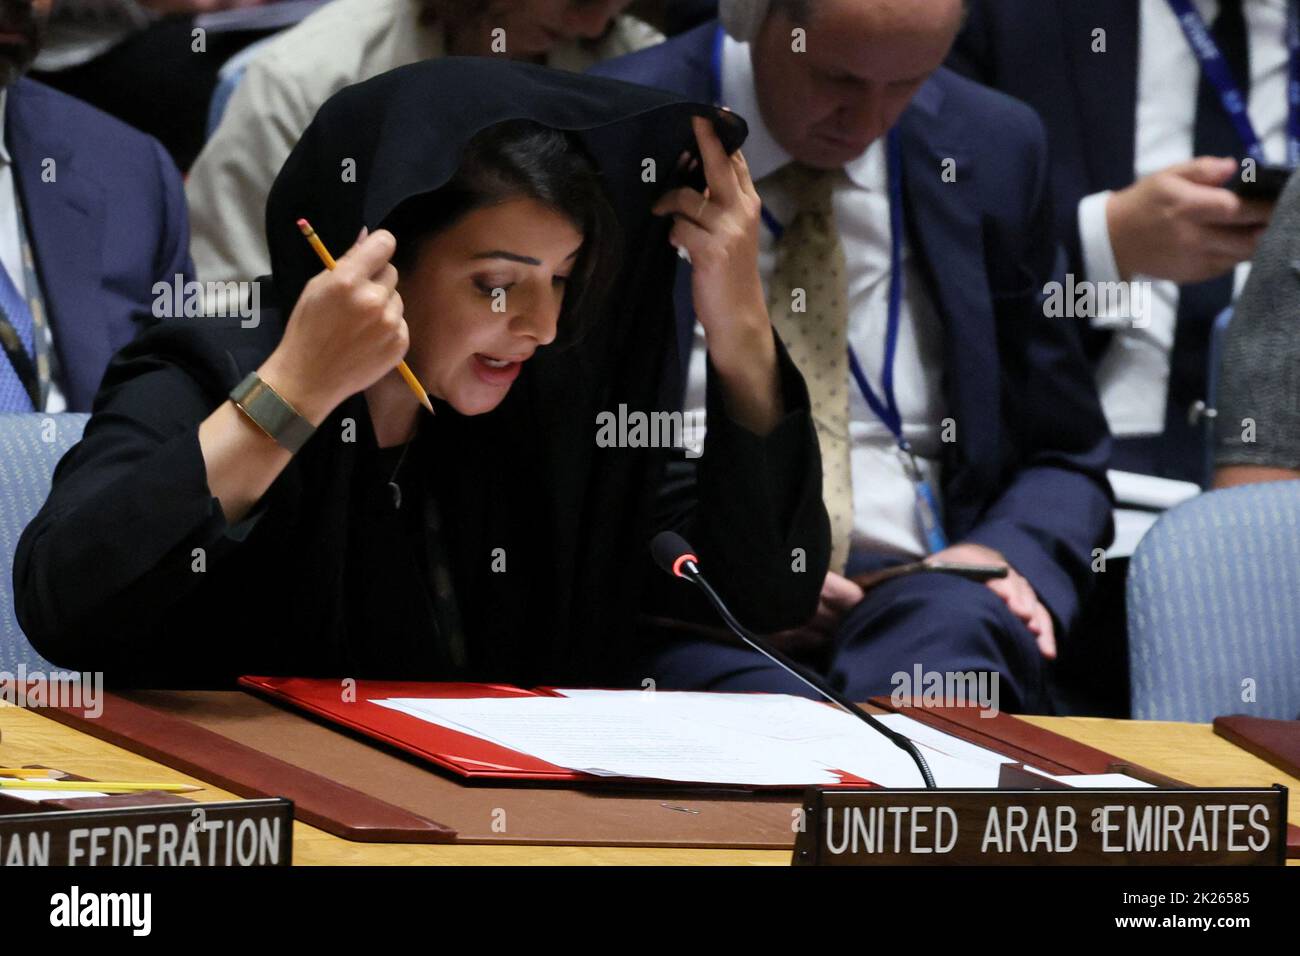 Reem Ibrahim Al Hashimy, UAE Minister of State for International Cooperation speaks during a high level meeting of the United Nations Security Council on the situation amid Russia's invasion of Ukraine, at the 77th Session of the United Nations General Assembly at U.N. Headquarters in New York City, U.S., September 22, 2022. REUTERS/Brendan McDermid Stock Photo